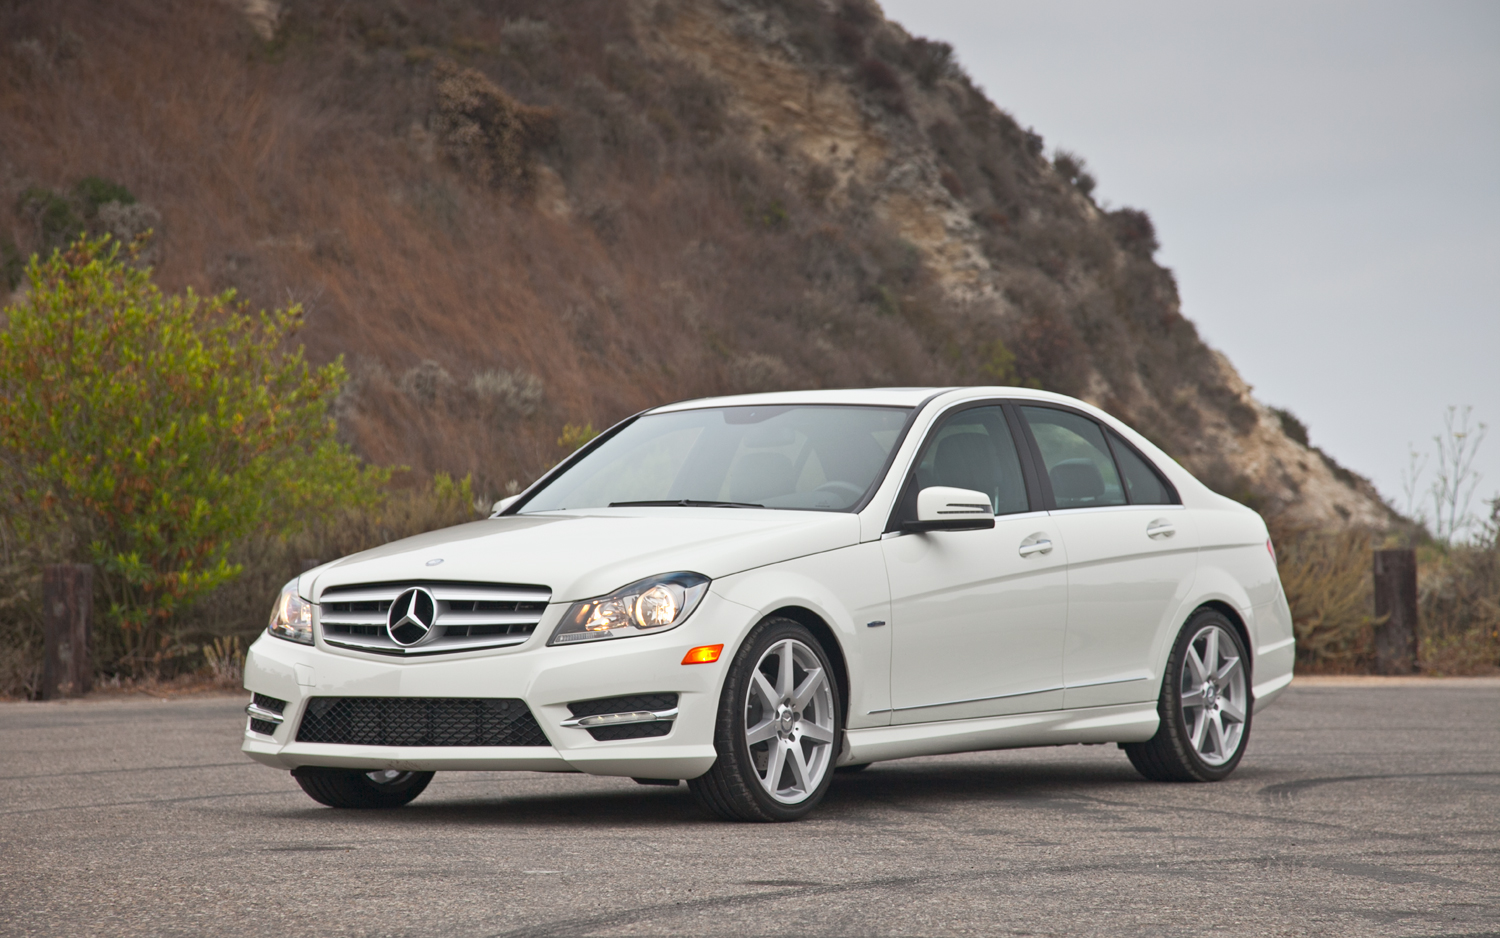 Mercedes-benz C250 2013: Review, Amazing Pictures and Images - Look at ...